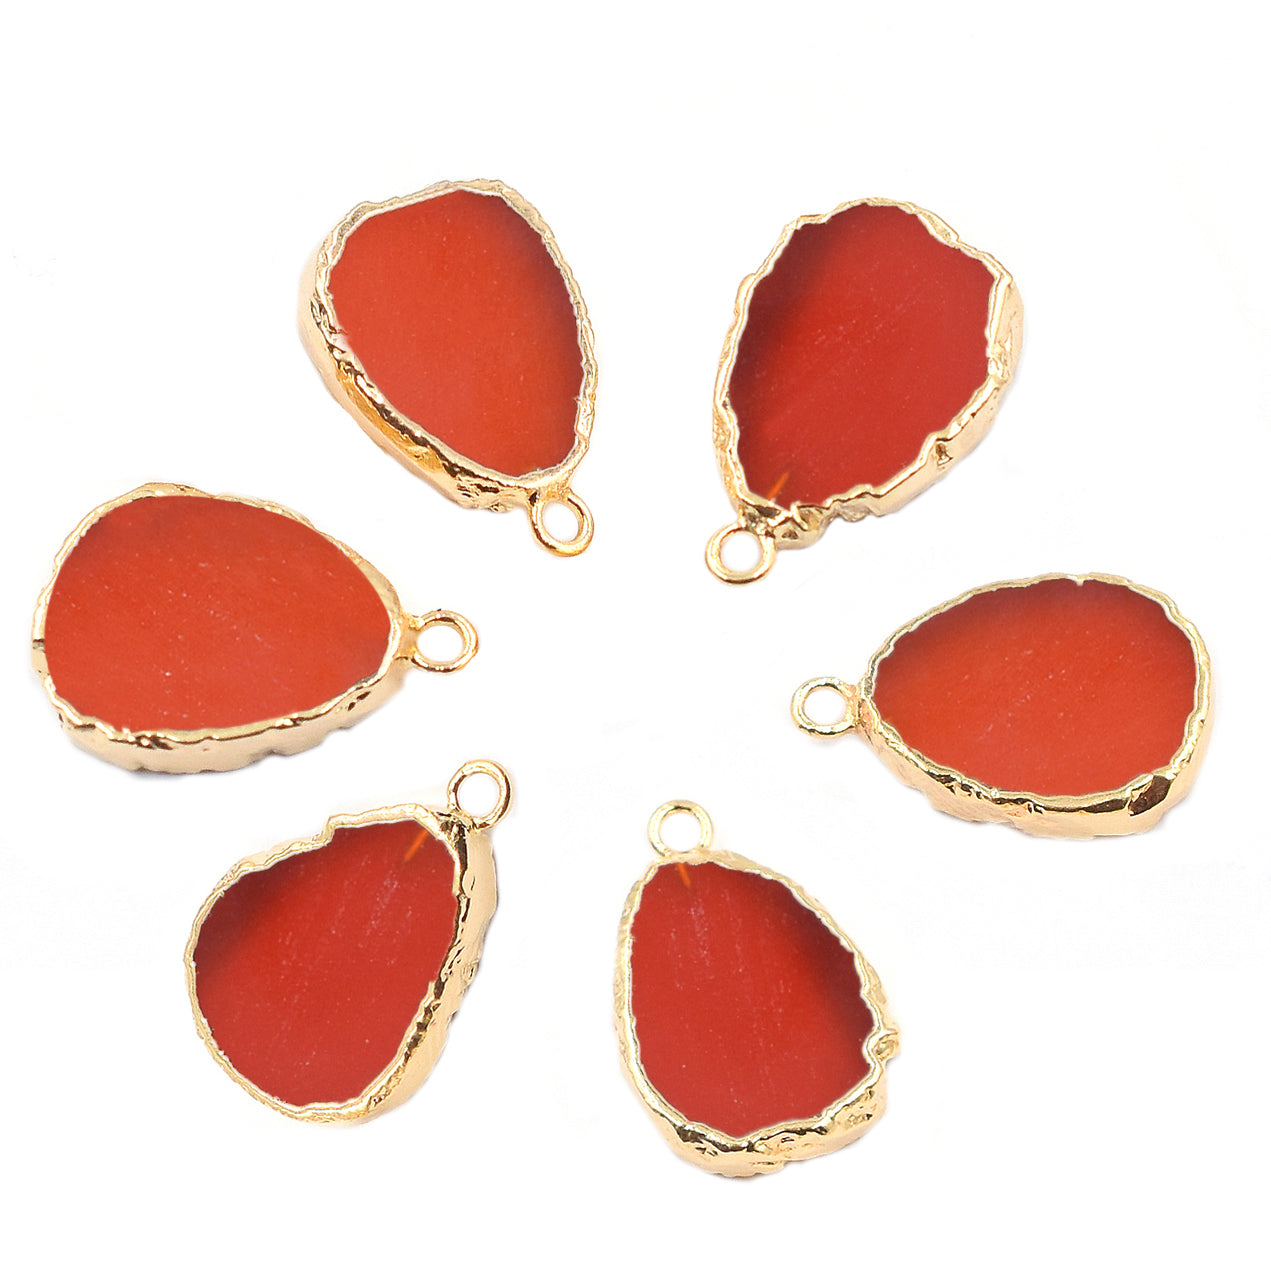 Red Onyx 17X13 MM Pear Shape Gold Electroplated Pendant